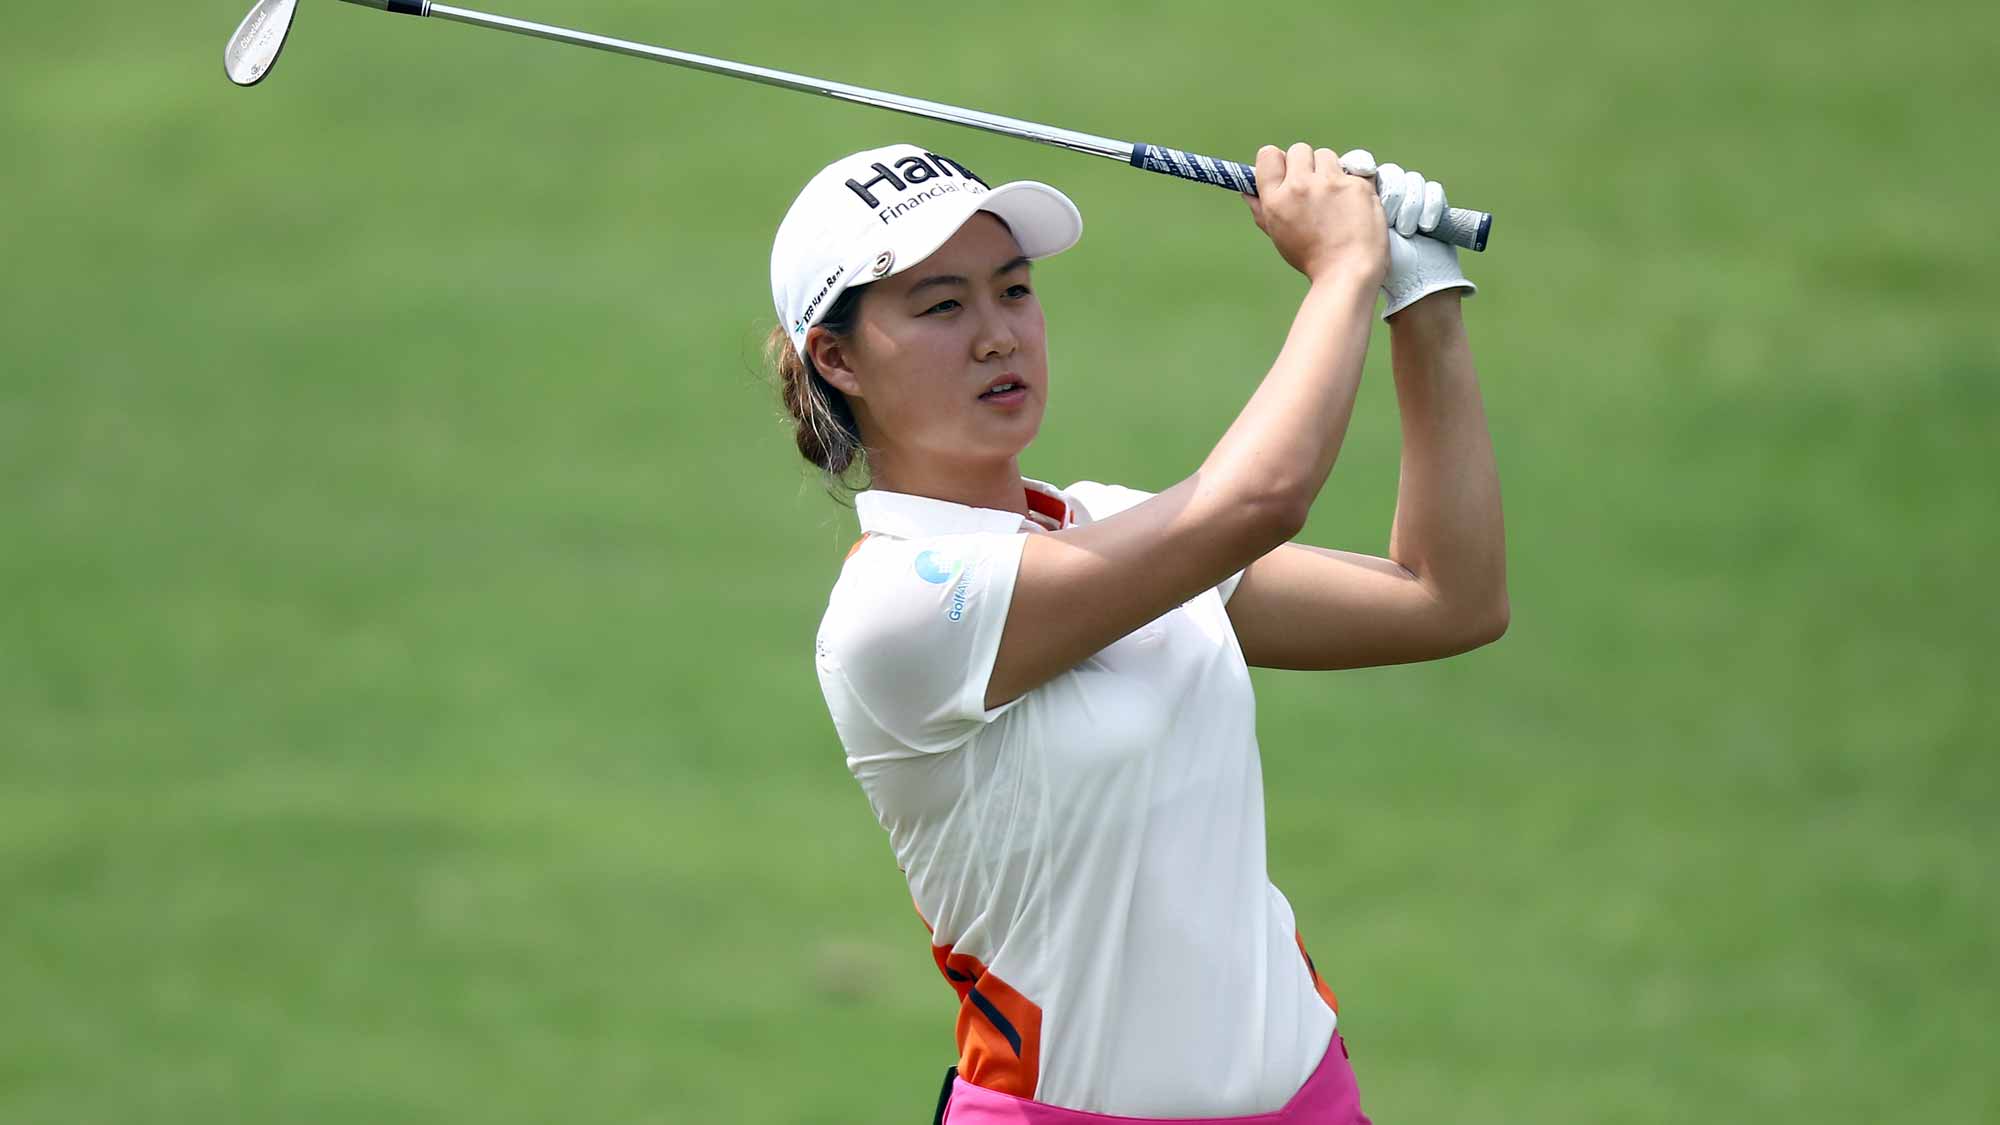 Minjee Lee of Australia plays her 2nd shot on the 2nd hole during round two of the Sime Darby LPGA Tour at Kuala Lumpur Golf & Country Club